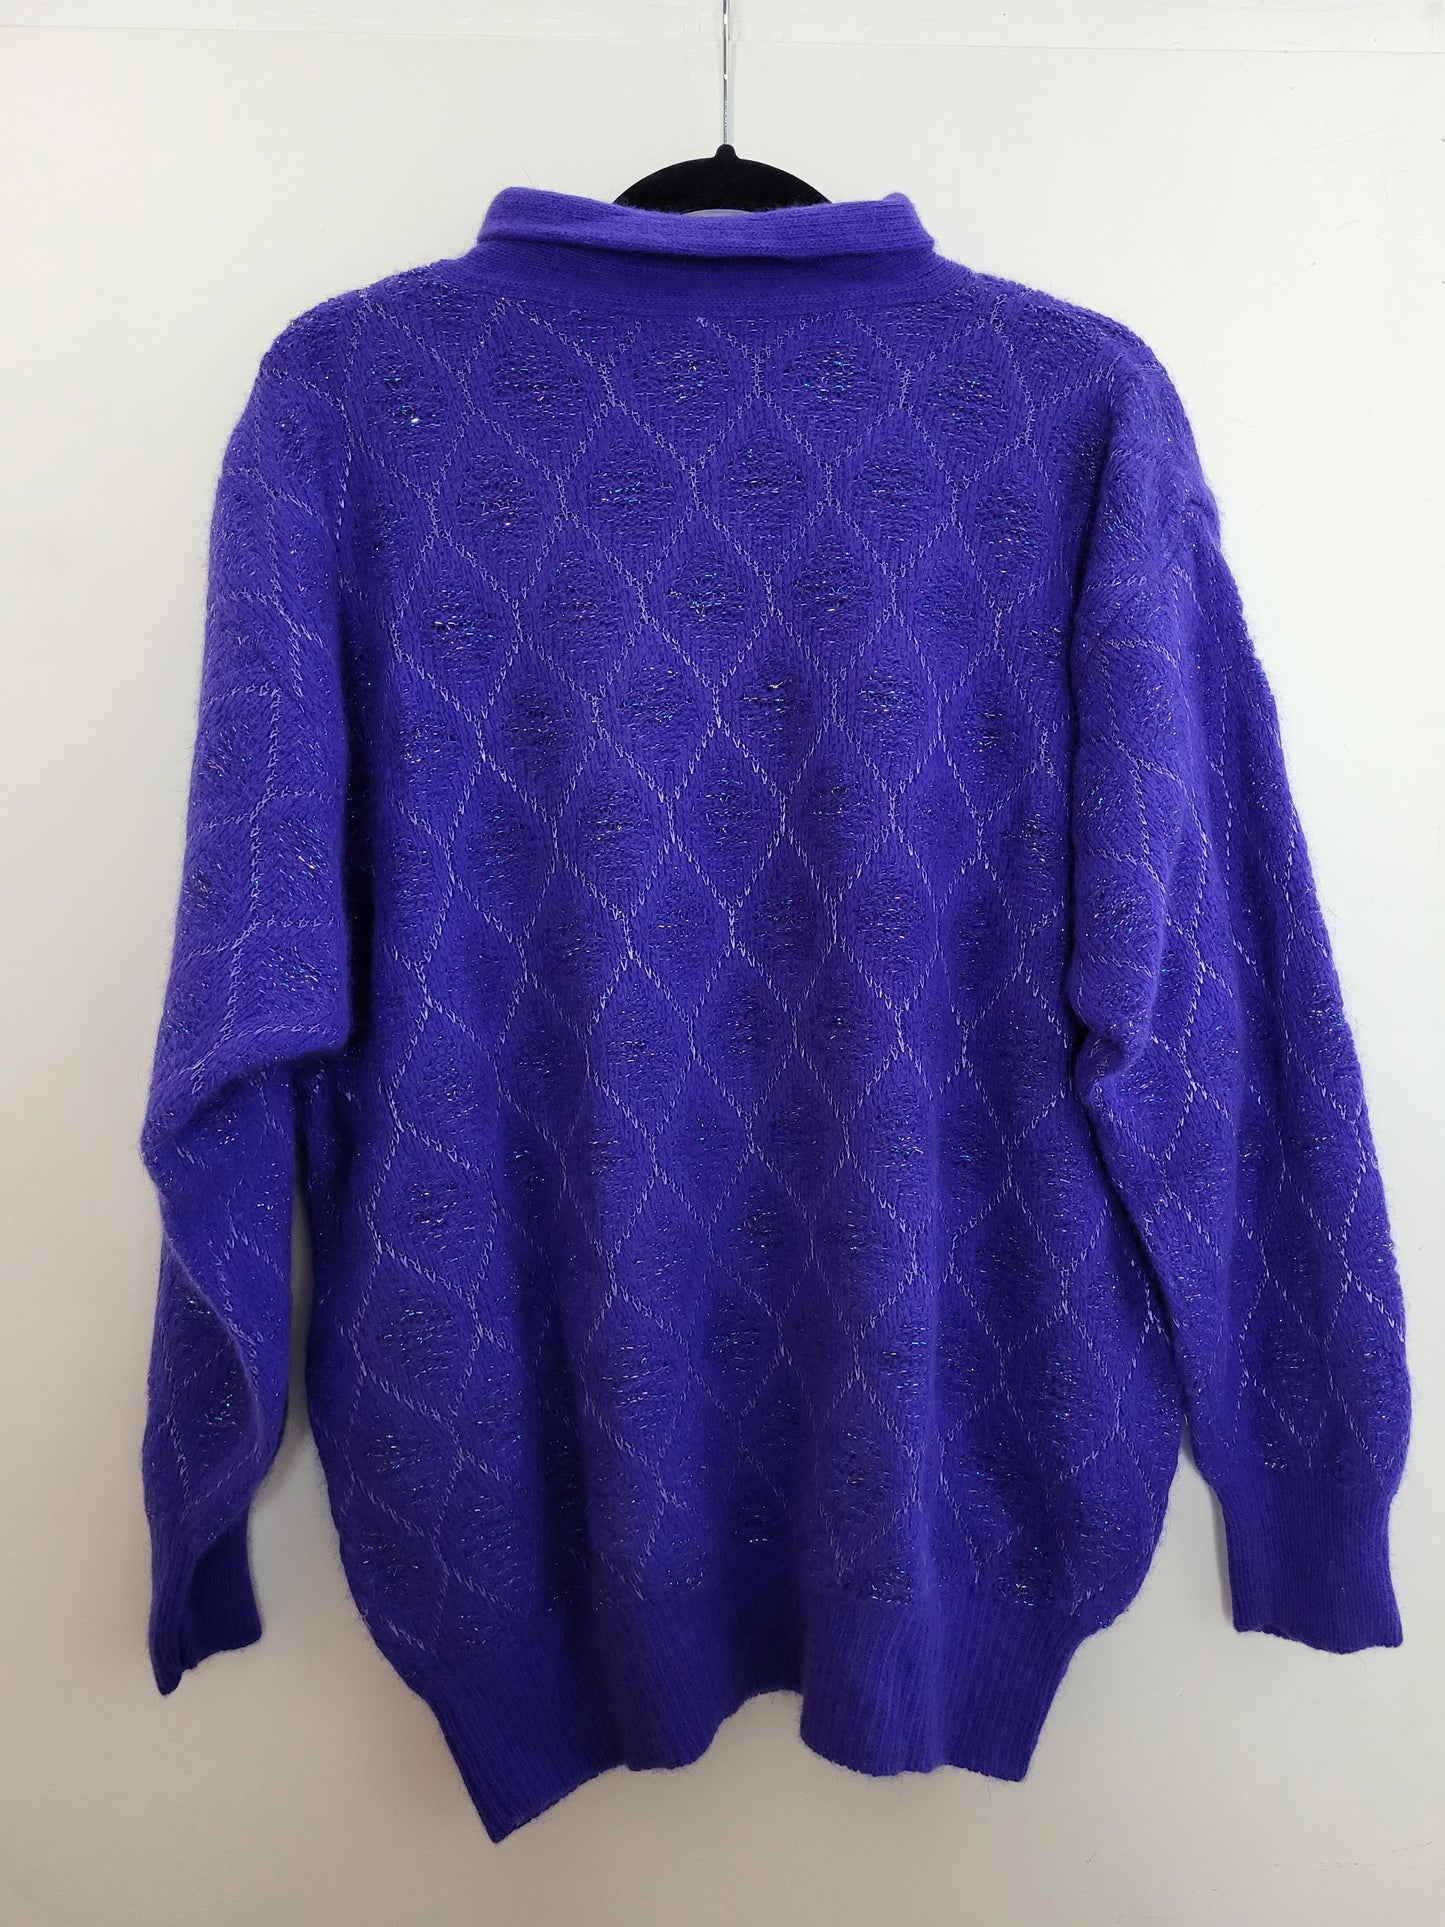 Vintage ANDRE MAURICE - Pullover - Muster - Vintage Wolle - Lila Glanz - Damen - L/XL